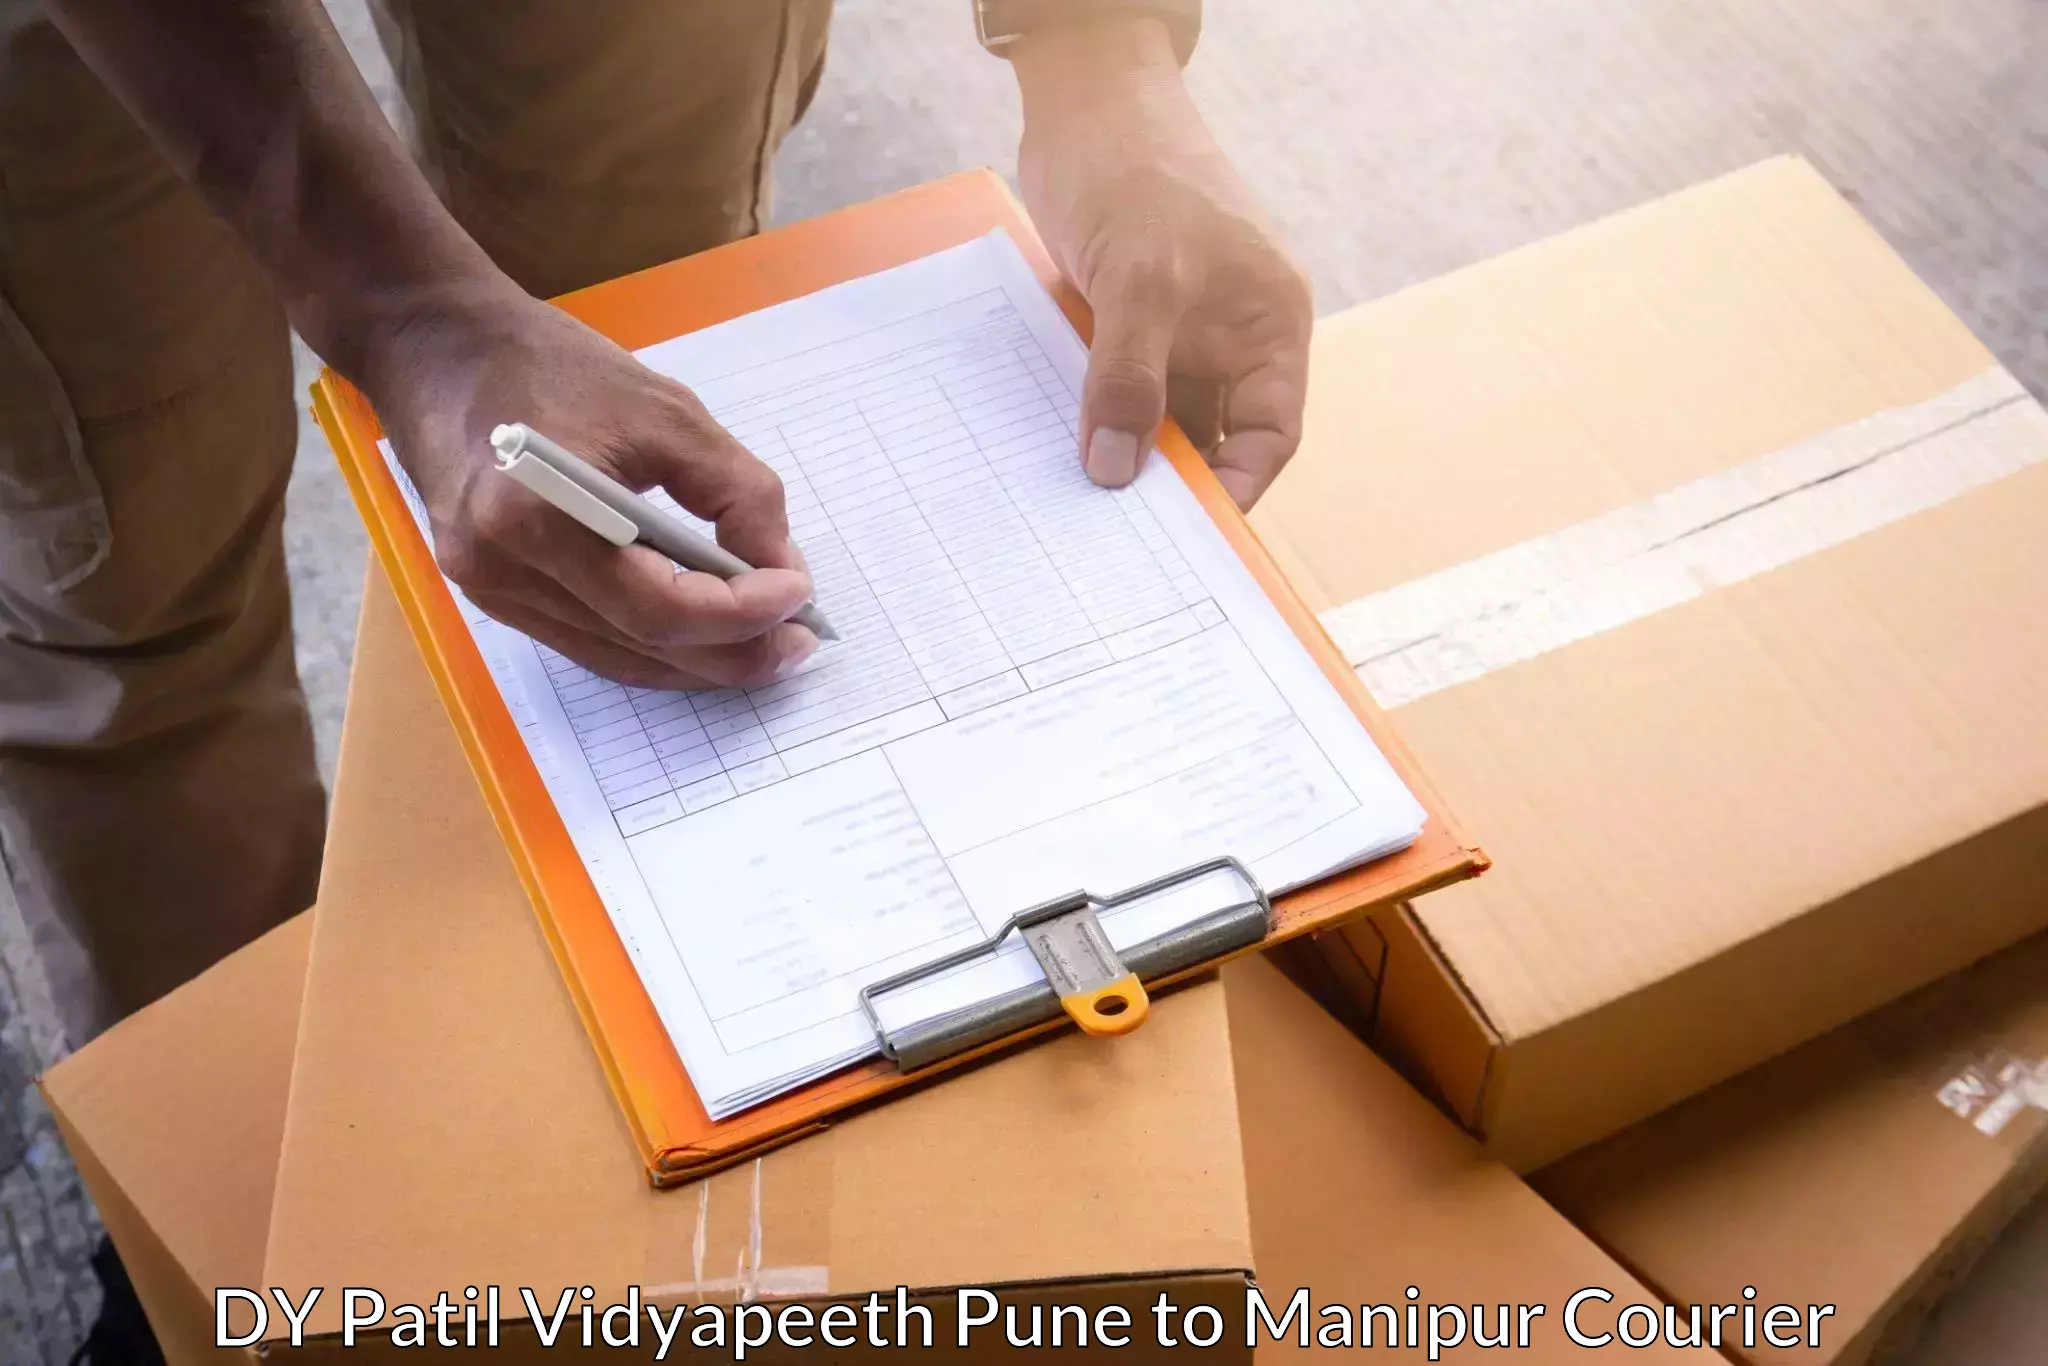 Multi-national courier services DY Patil Vidyapeeth Pune to Manipur